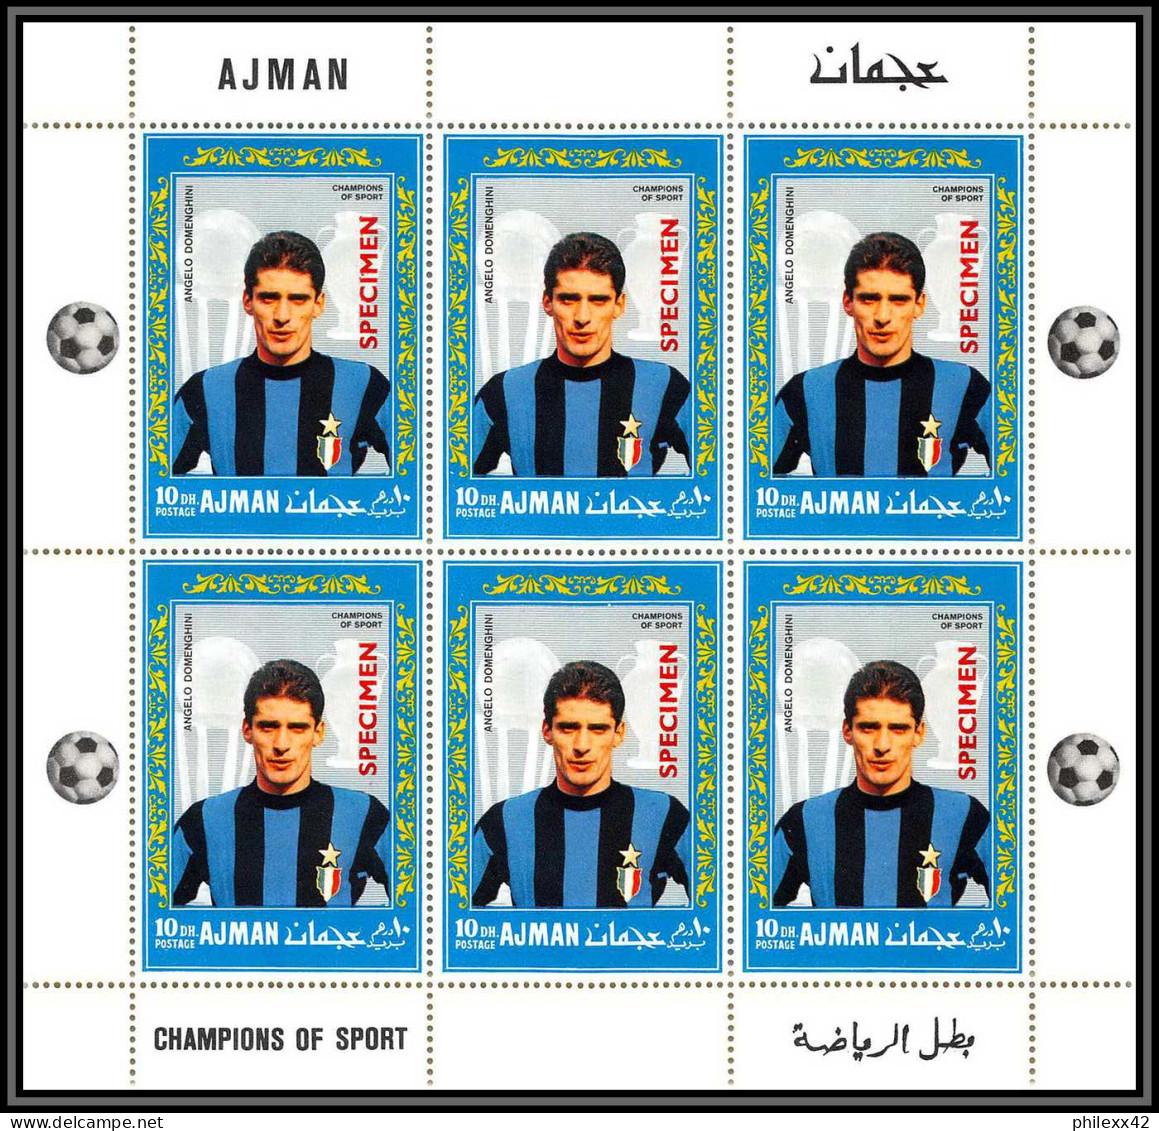 Ajman - 4688/ N°304 A Domenghini Inter Milan Neuf ** MNH Football Soccer Surcharge Specimen Overprint Both Sides Sheet - Famous Clubs